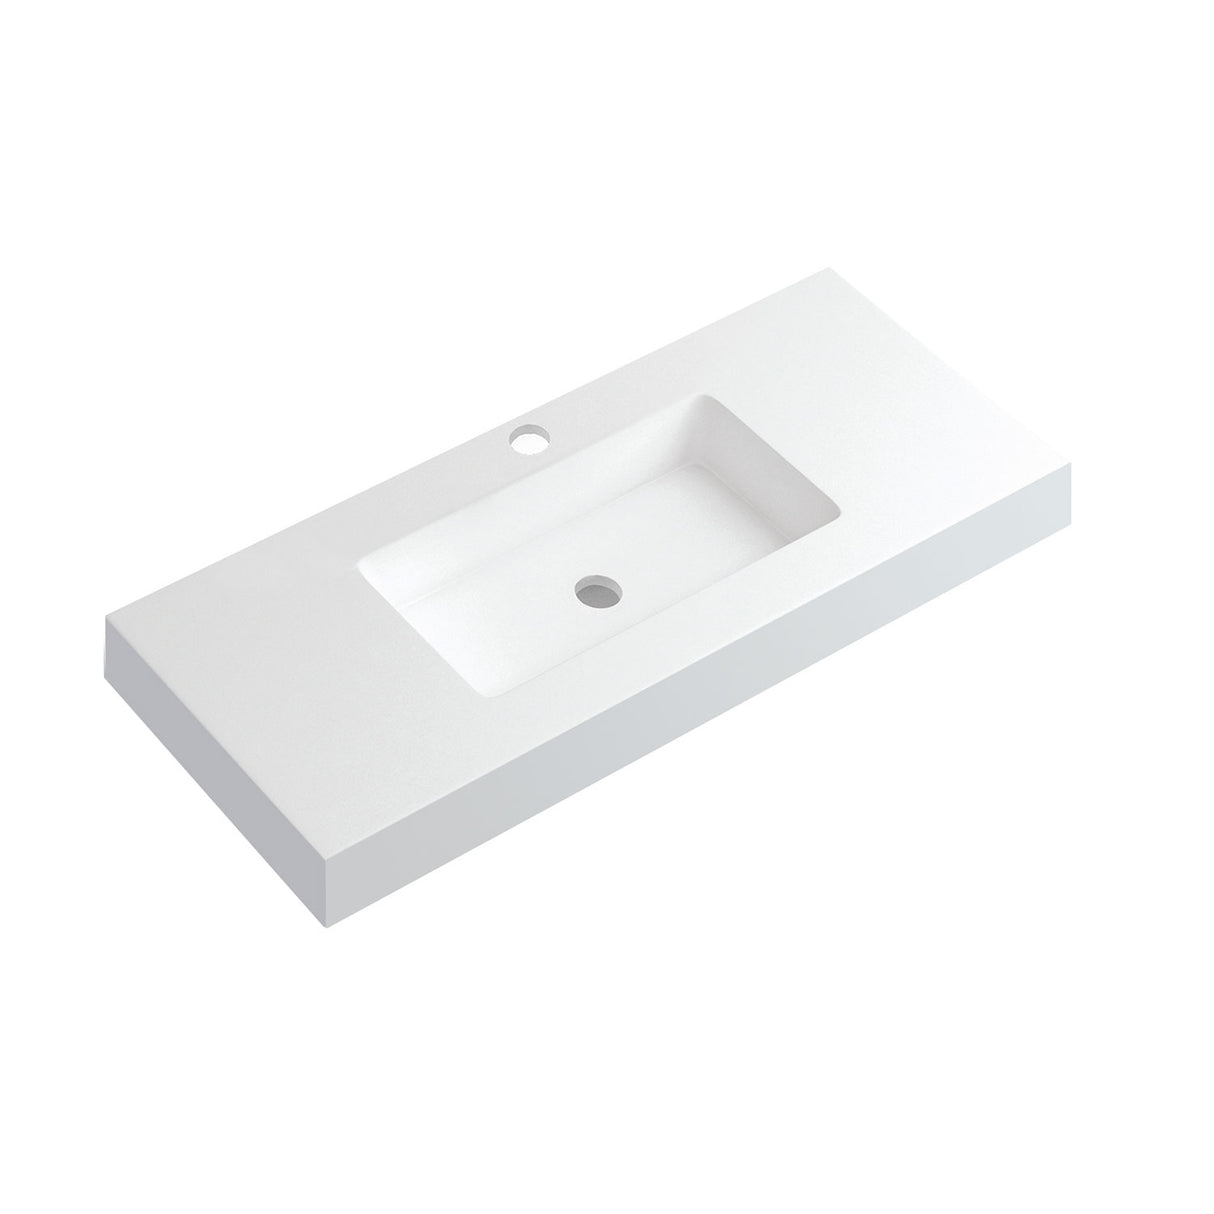 DAX Bayside Solid Surface Single Vanity Top Basin, 40", Matte White DAX-BAY401AMB-L